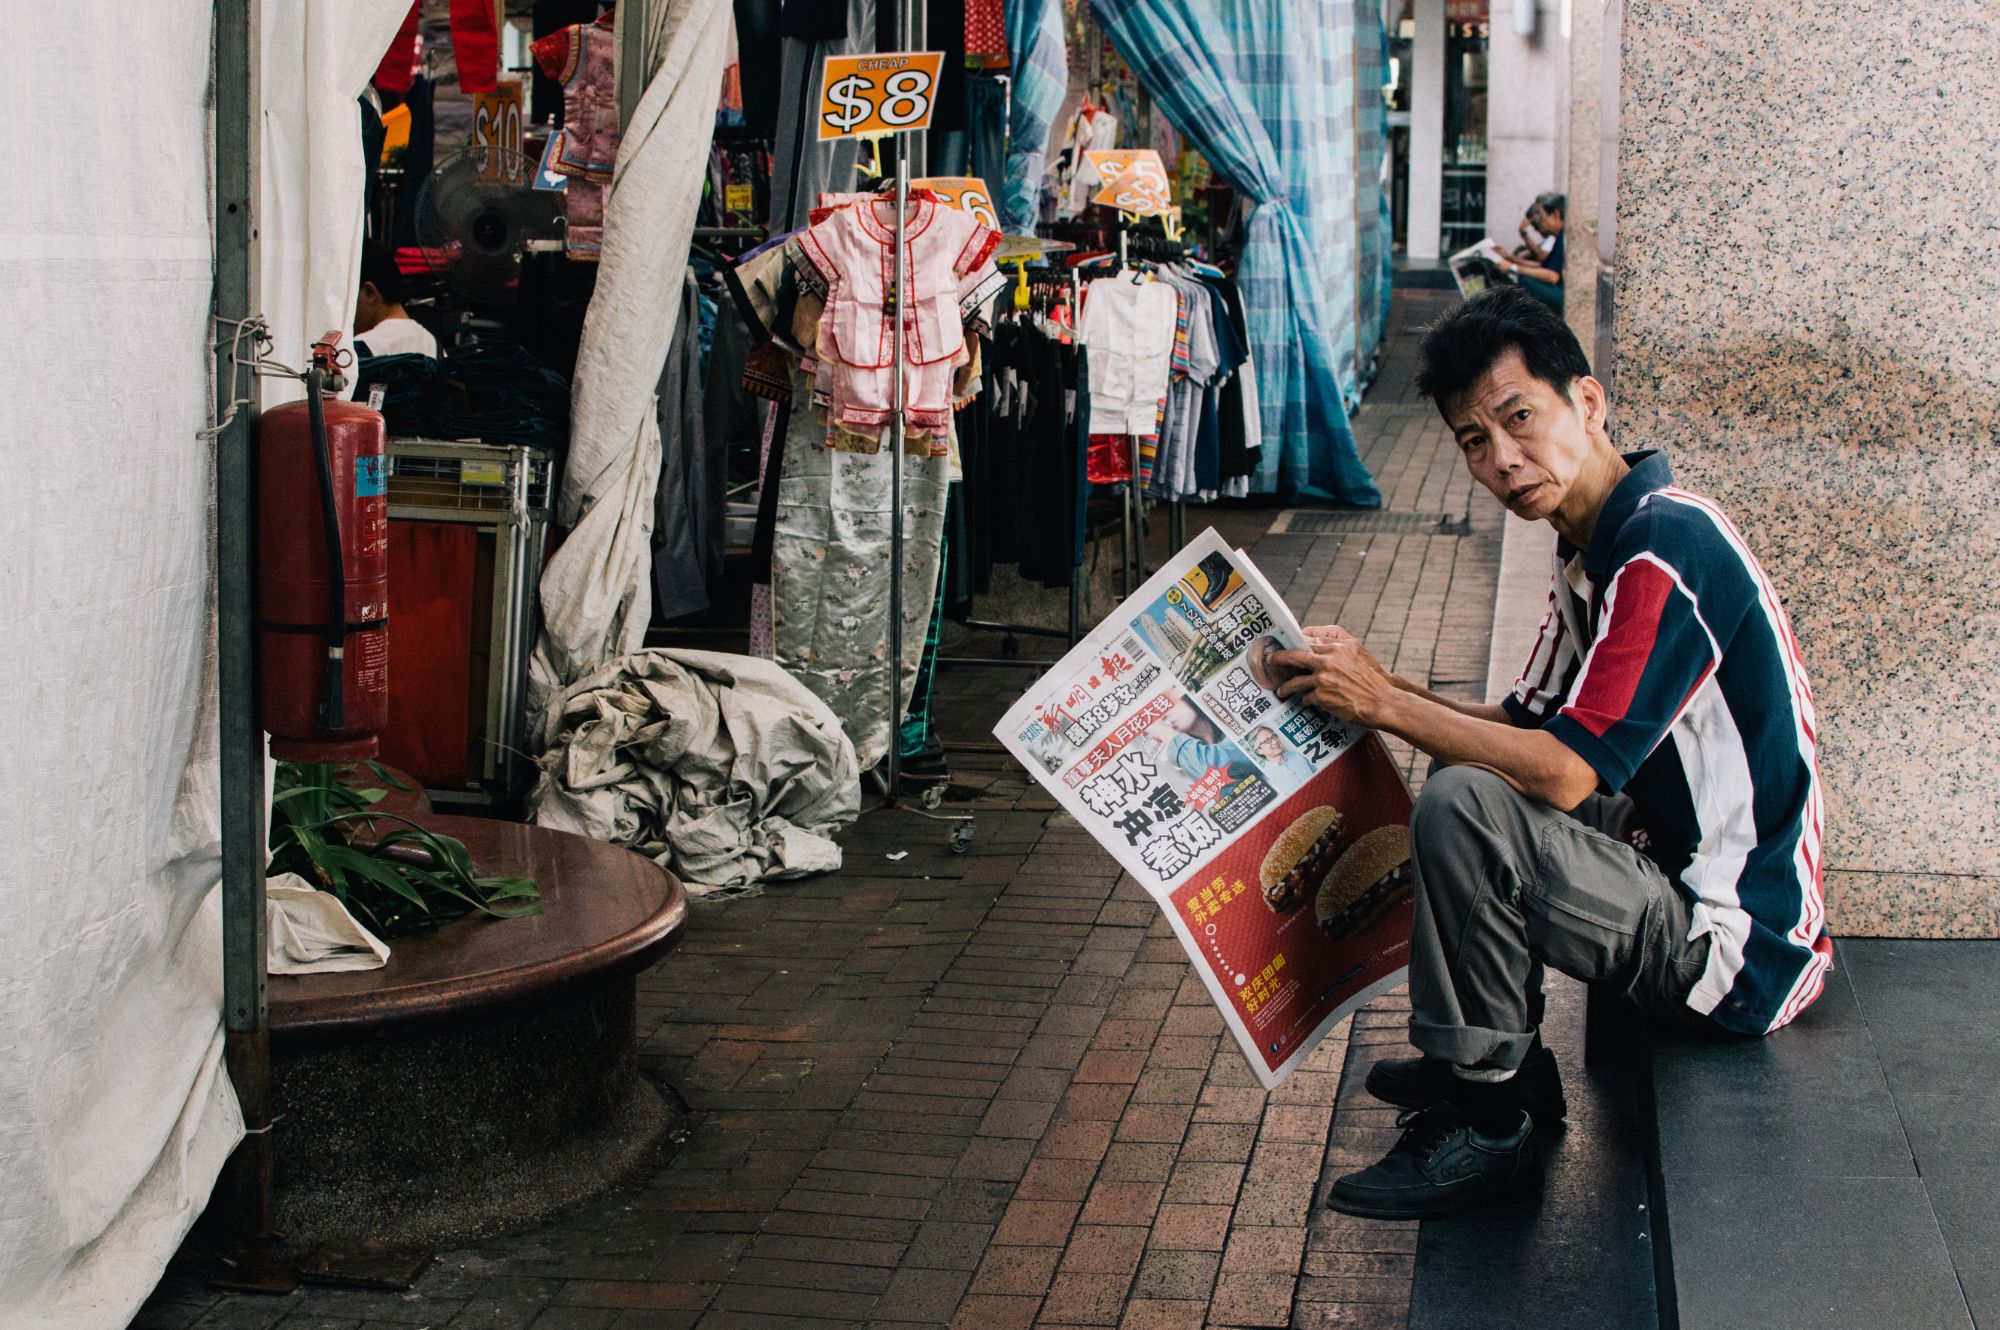 Man sitting and reading newspaper outside shop